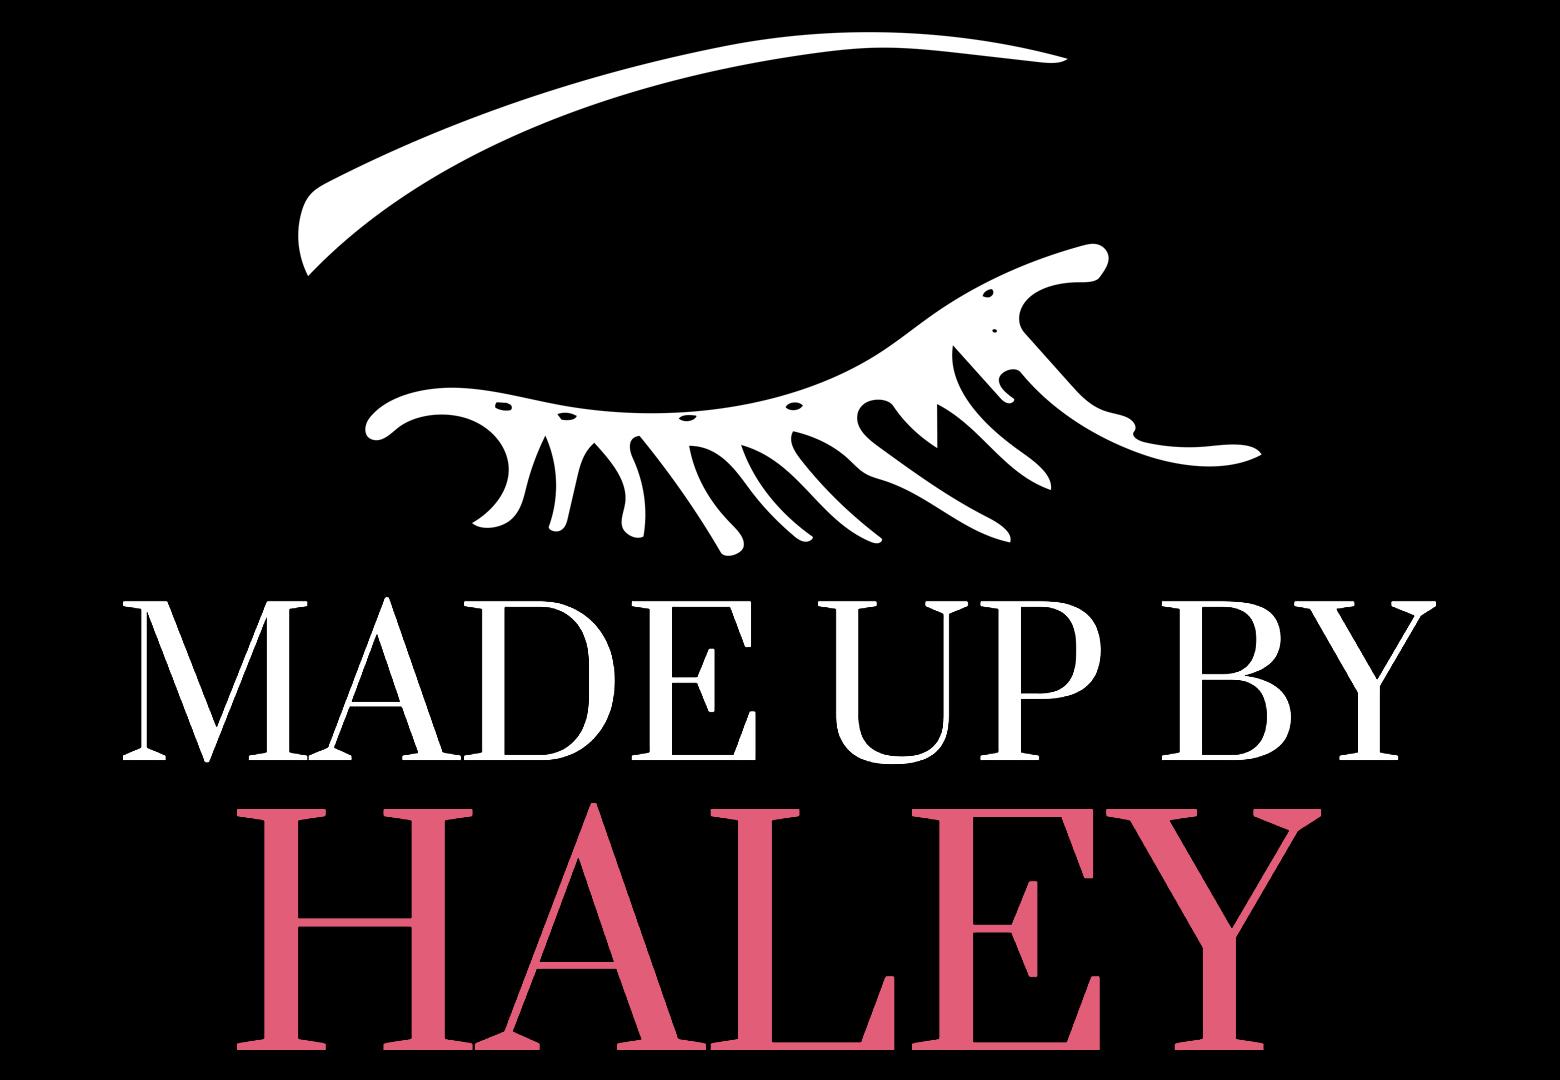 Haley Logo - Home - MADE UP BY HALEY - Makeup Artist, Photoshoots, Bridal, Events ...